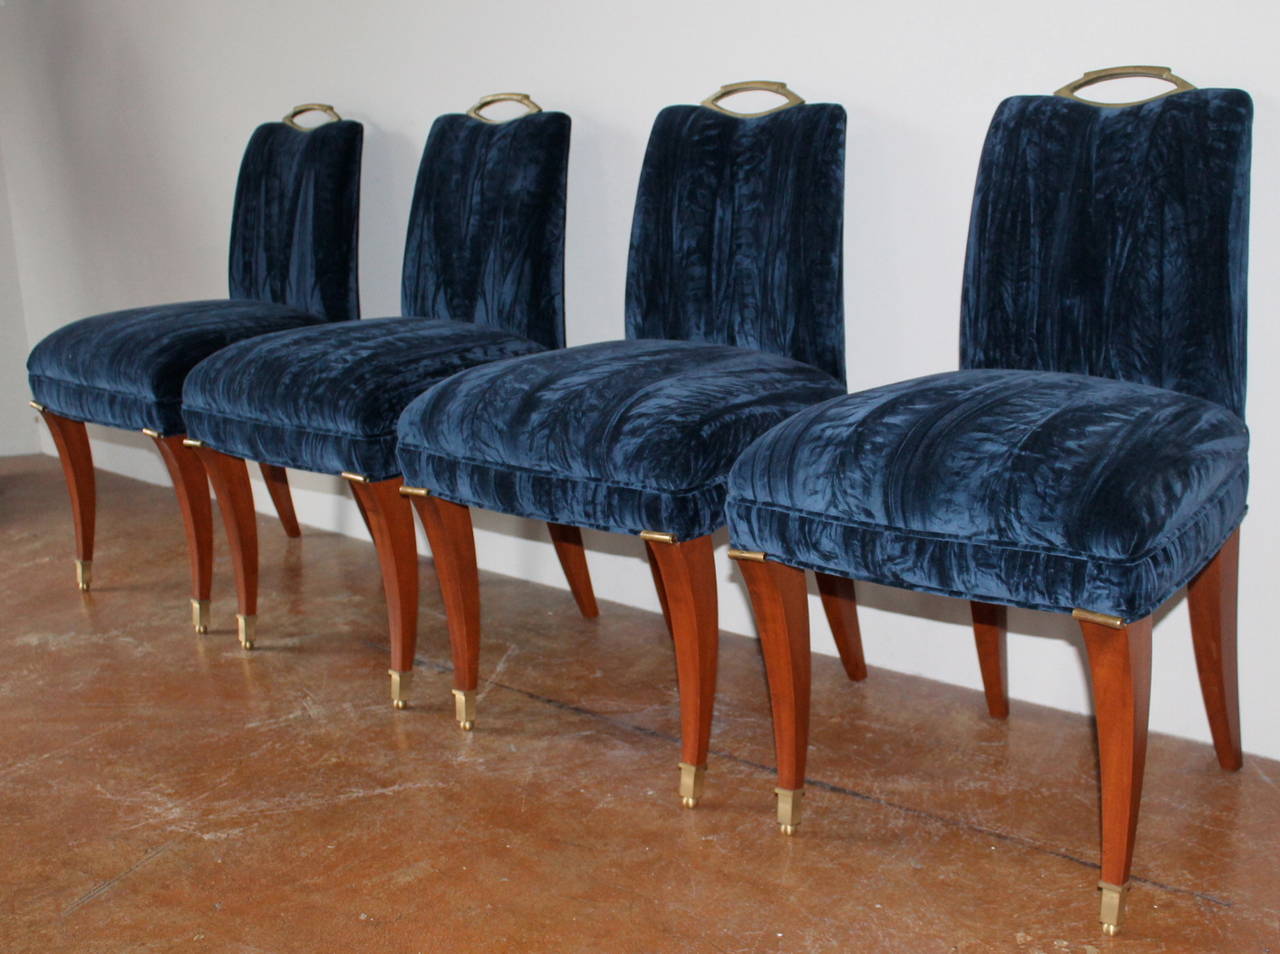 Mexican Arturo Pani Mahogany and Crushed Blue Velvet Dining Chairs, Mexico, 1950s